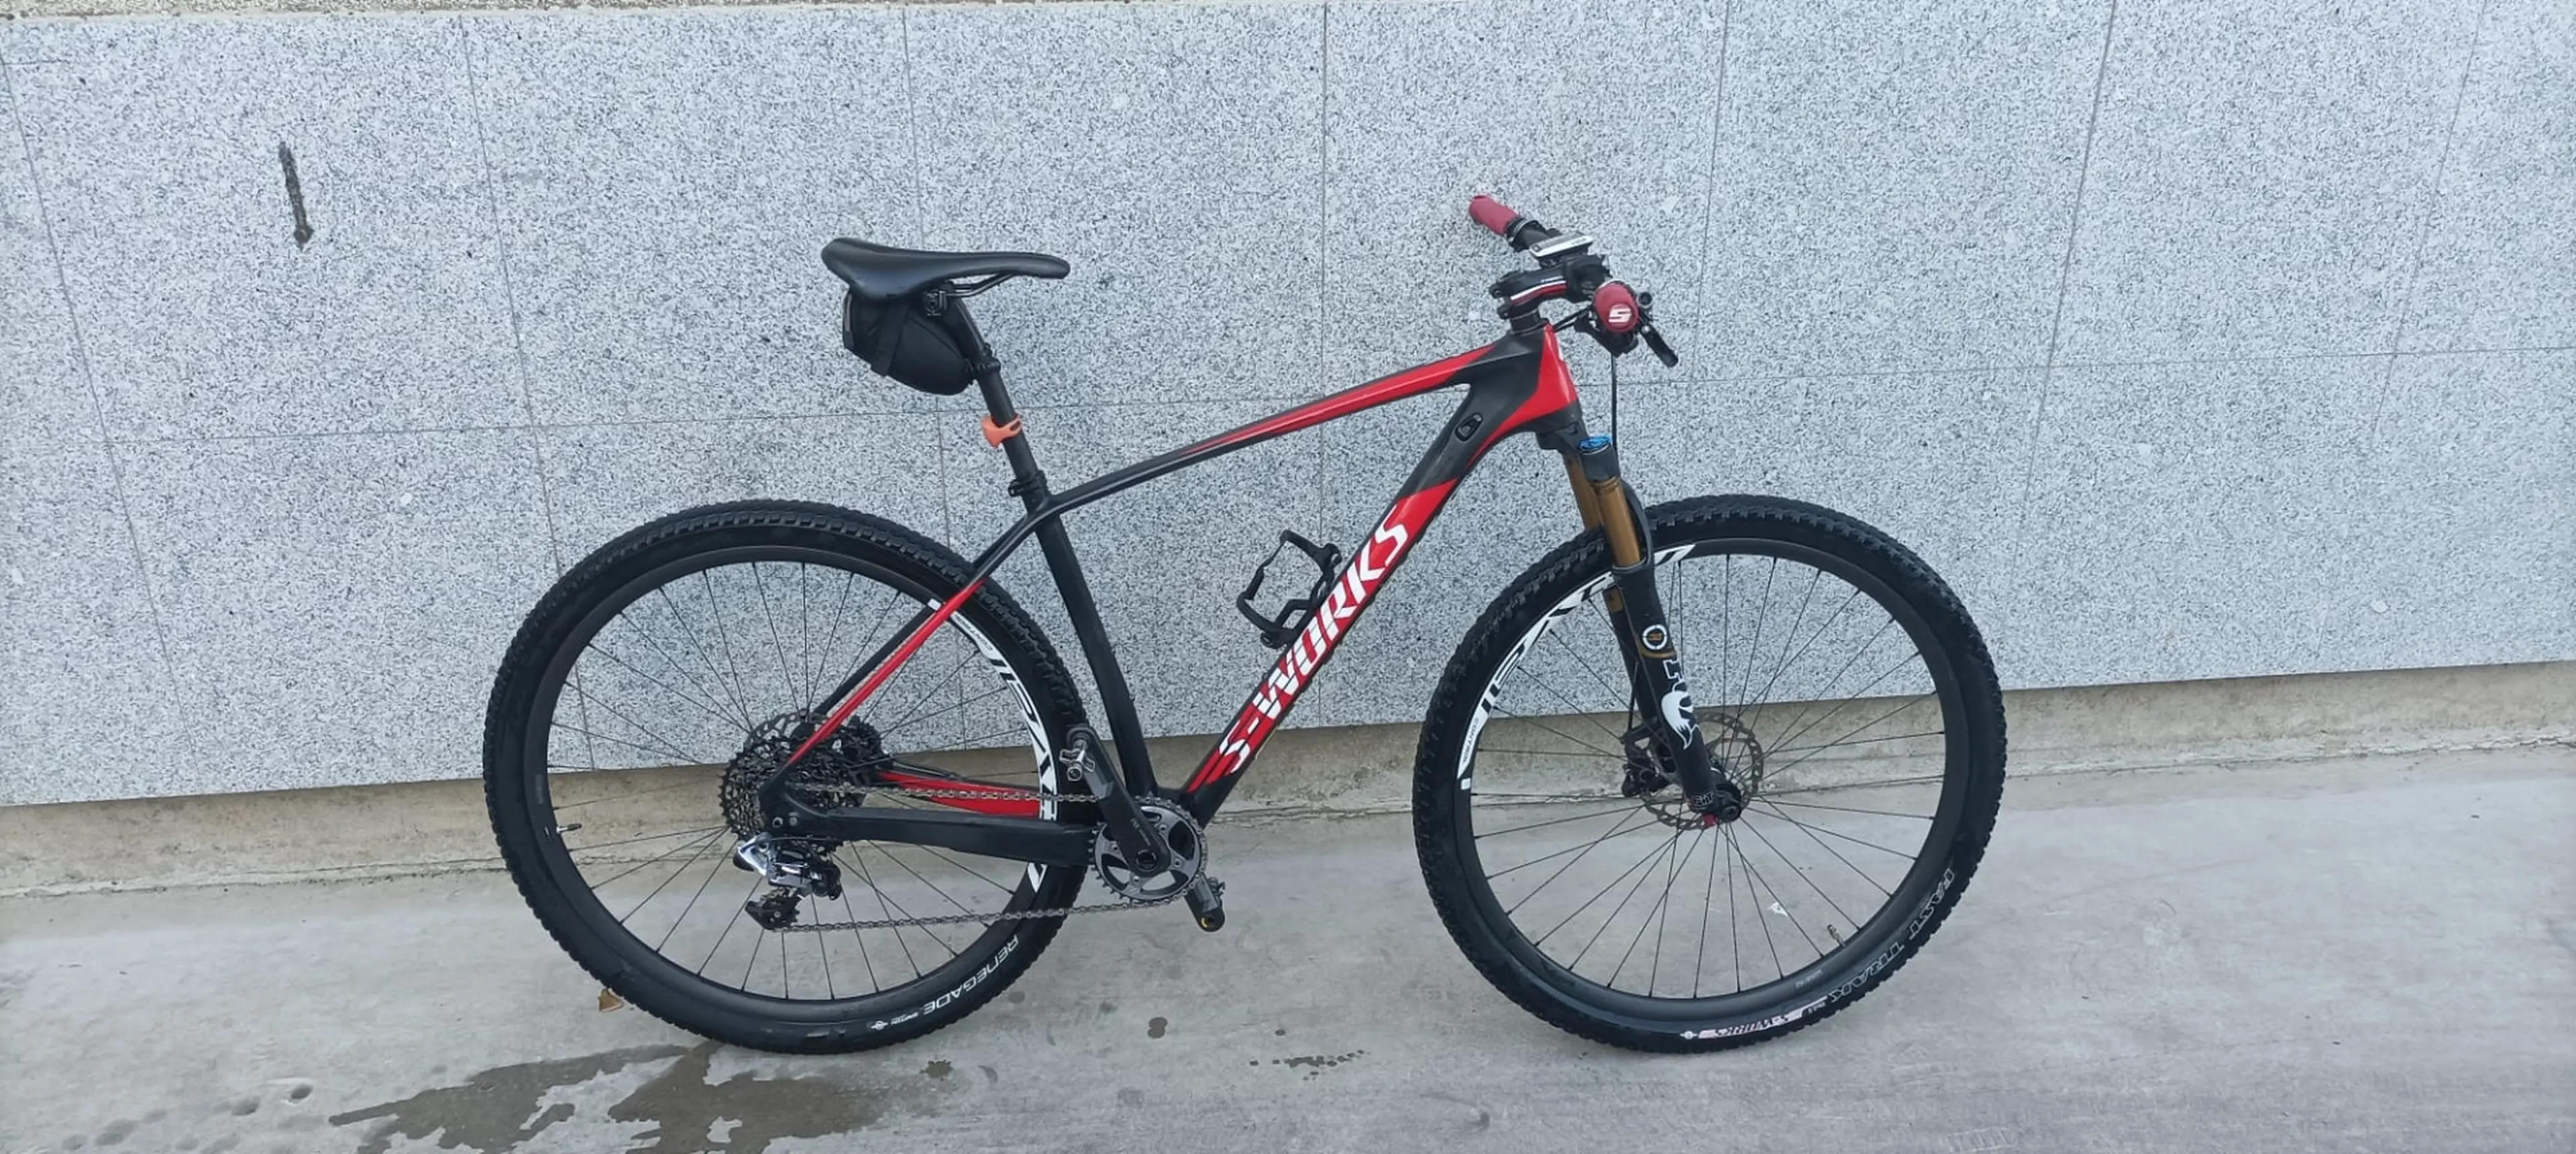 4. Specialized stumpjumper S-Works